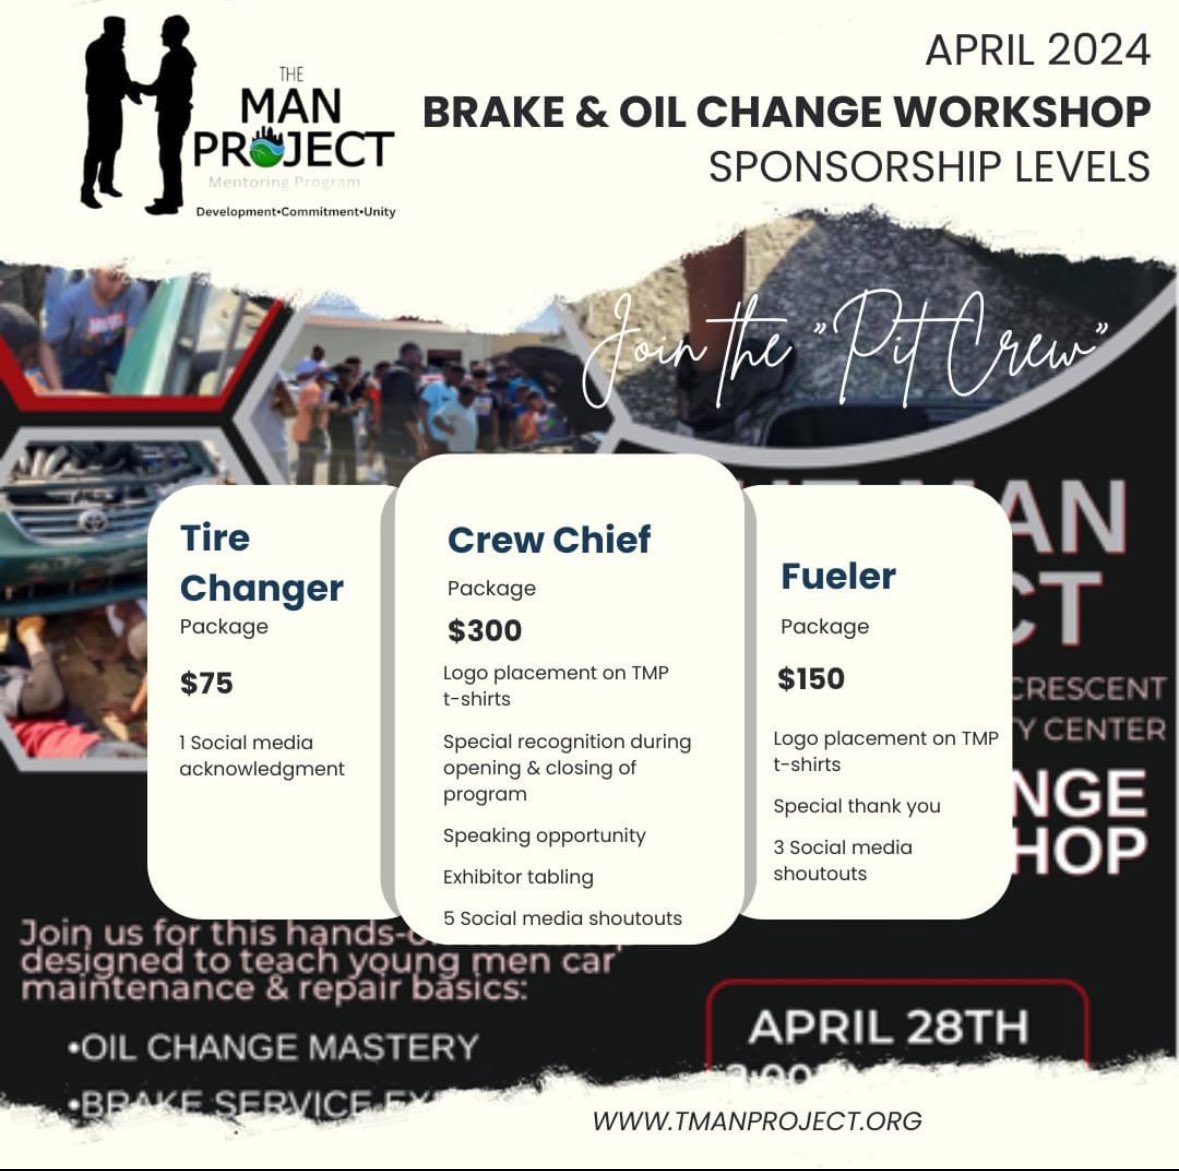 Calling all potential sponsors! Are U ready to rev up your brand's visibility and support our Brake & Oil Change Workshop? Check out our sponsorship opportunities: Don't miss this chance to showcase your brand, connect with our audience, and be part of an unforgettable event!